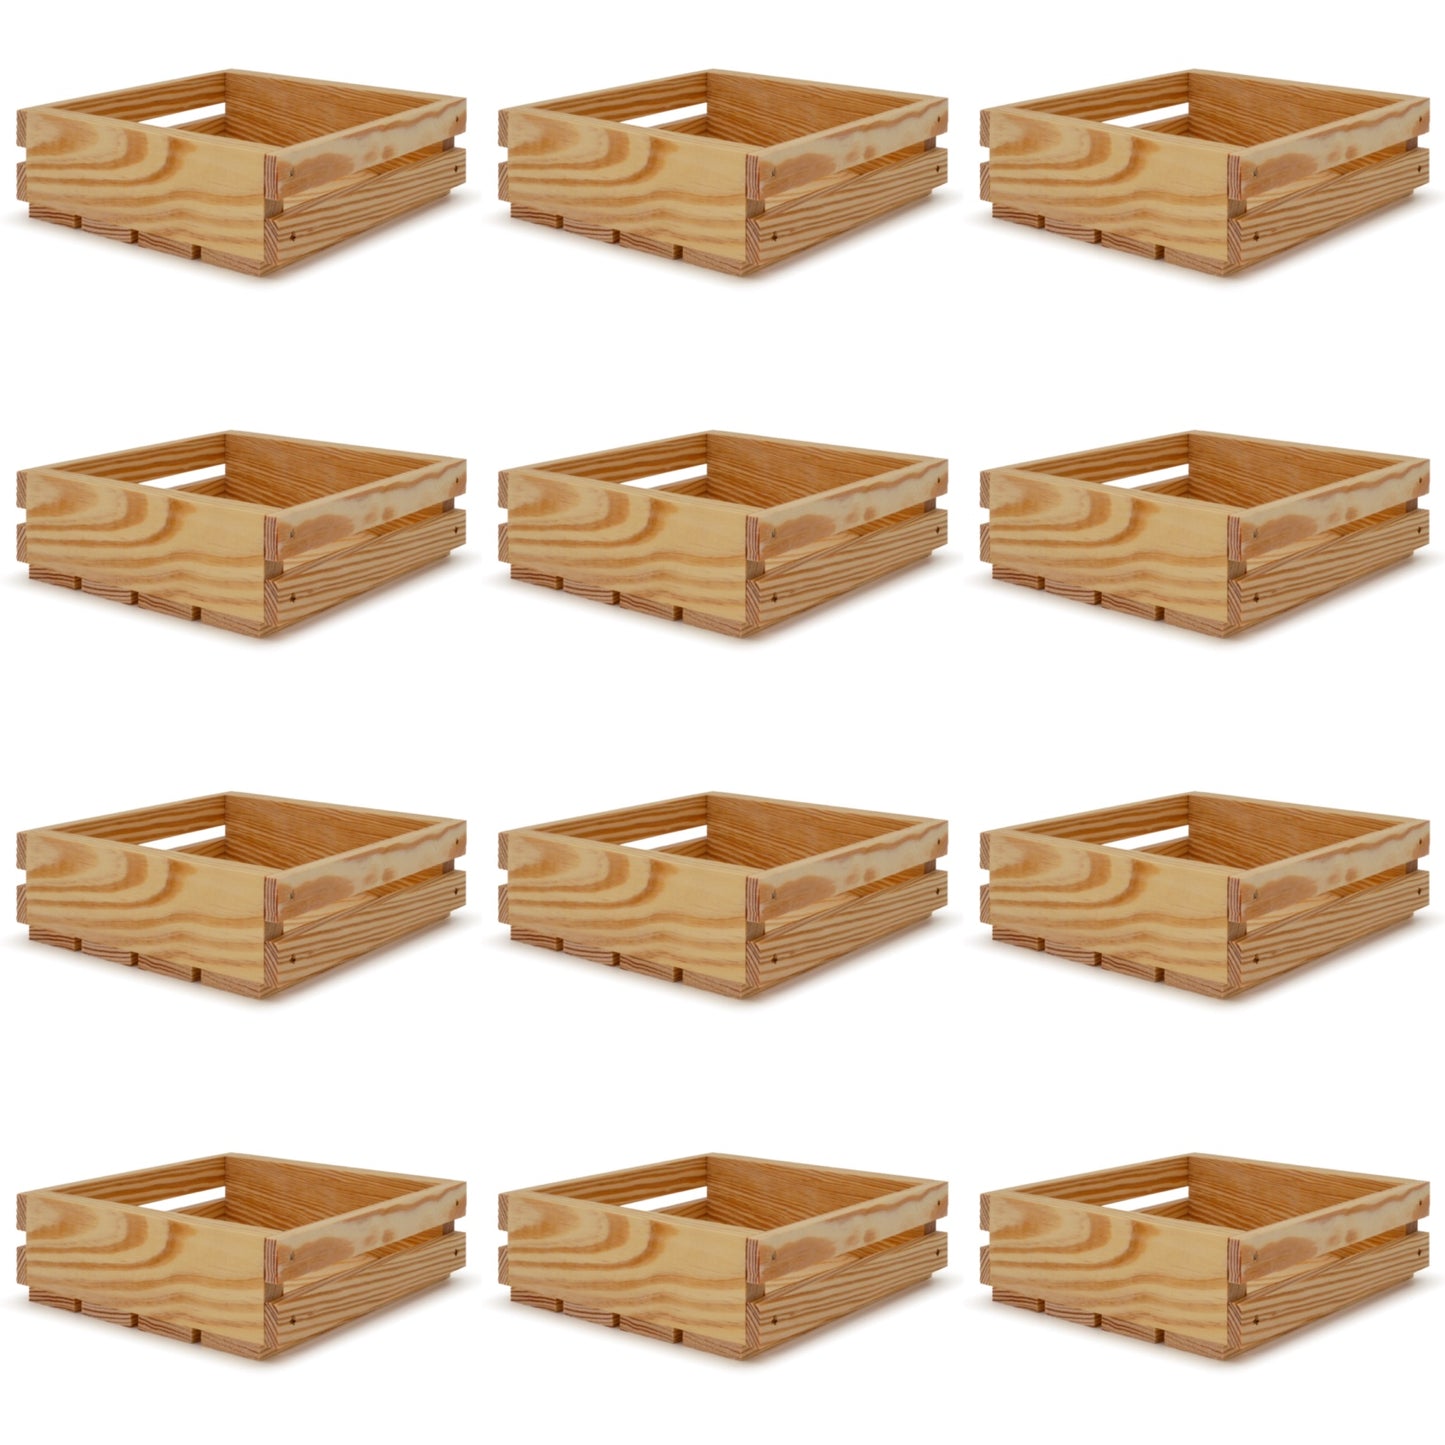 12 Small wooden crates 8x8x2.5